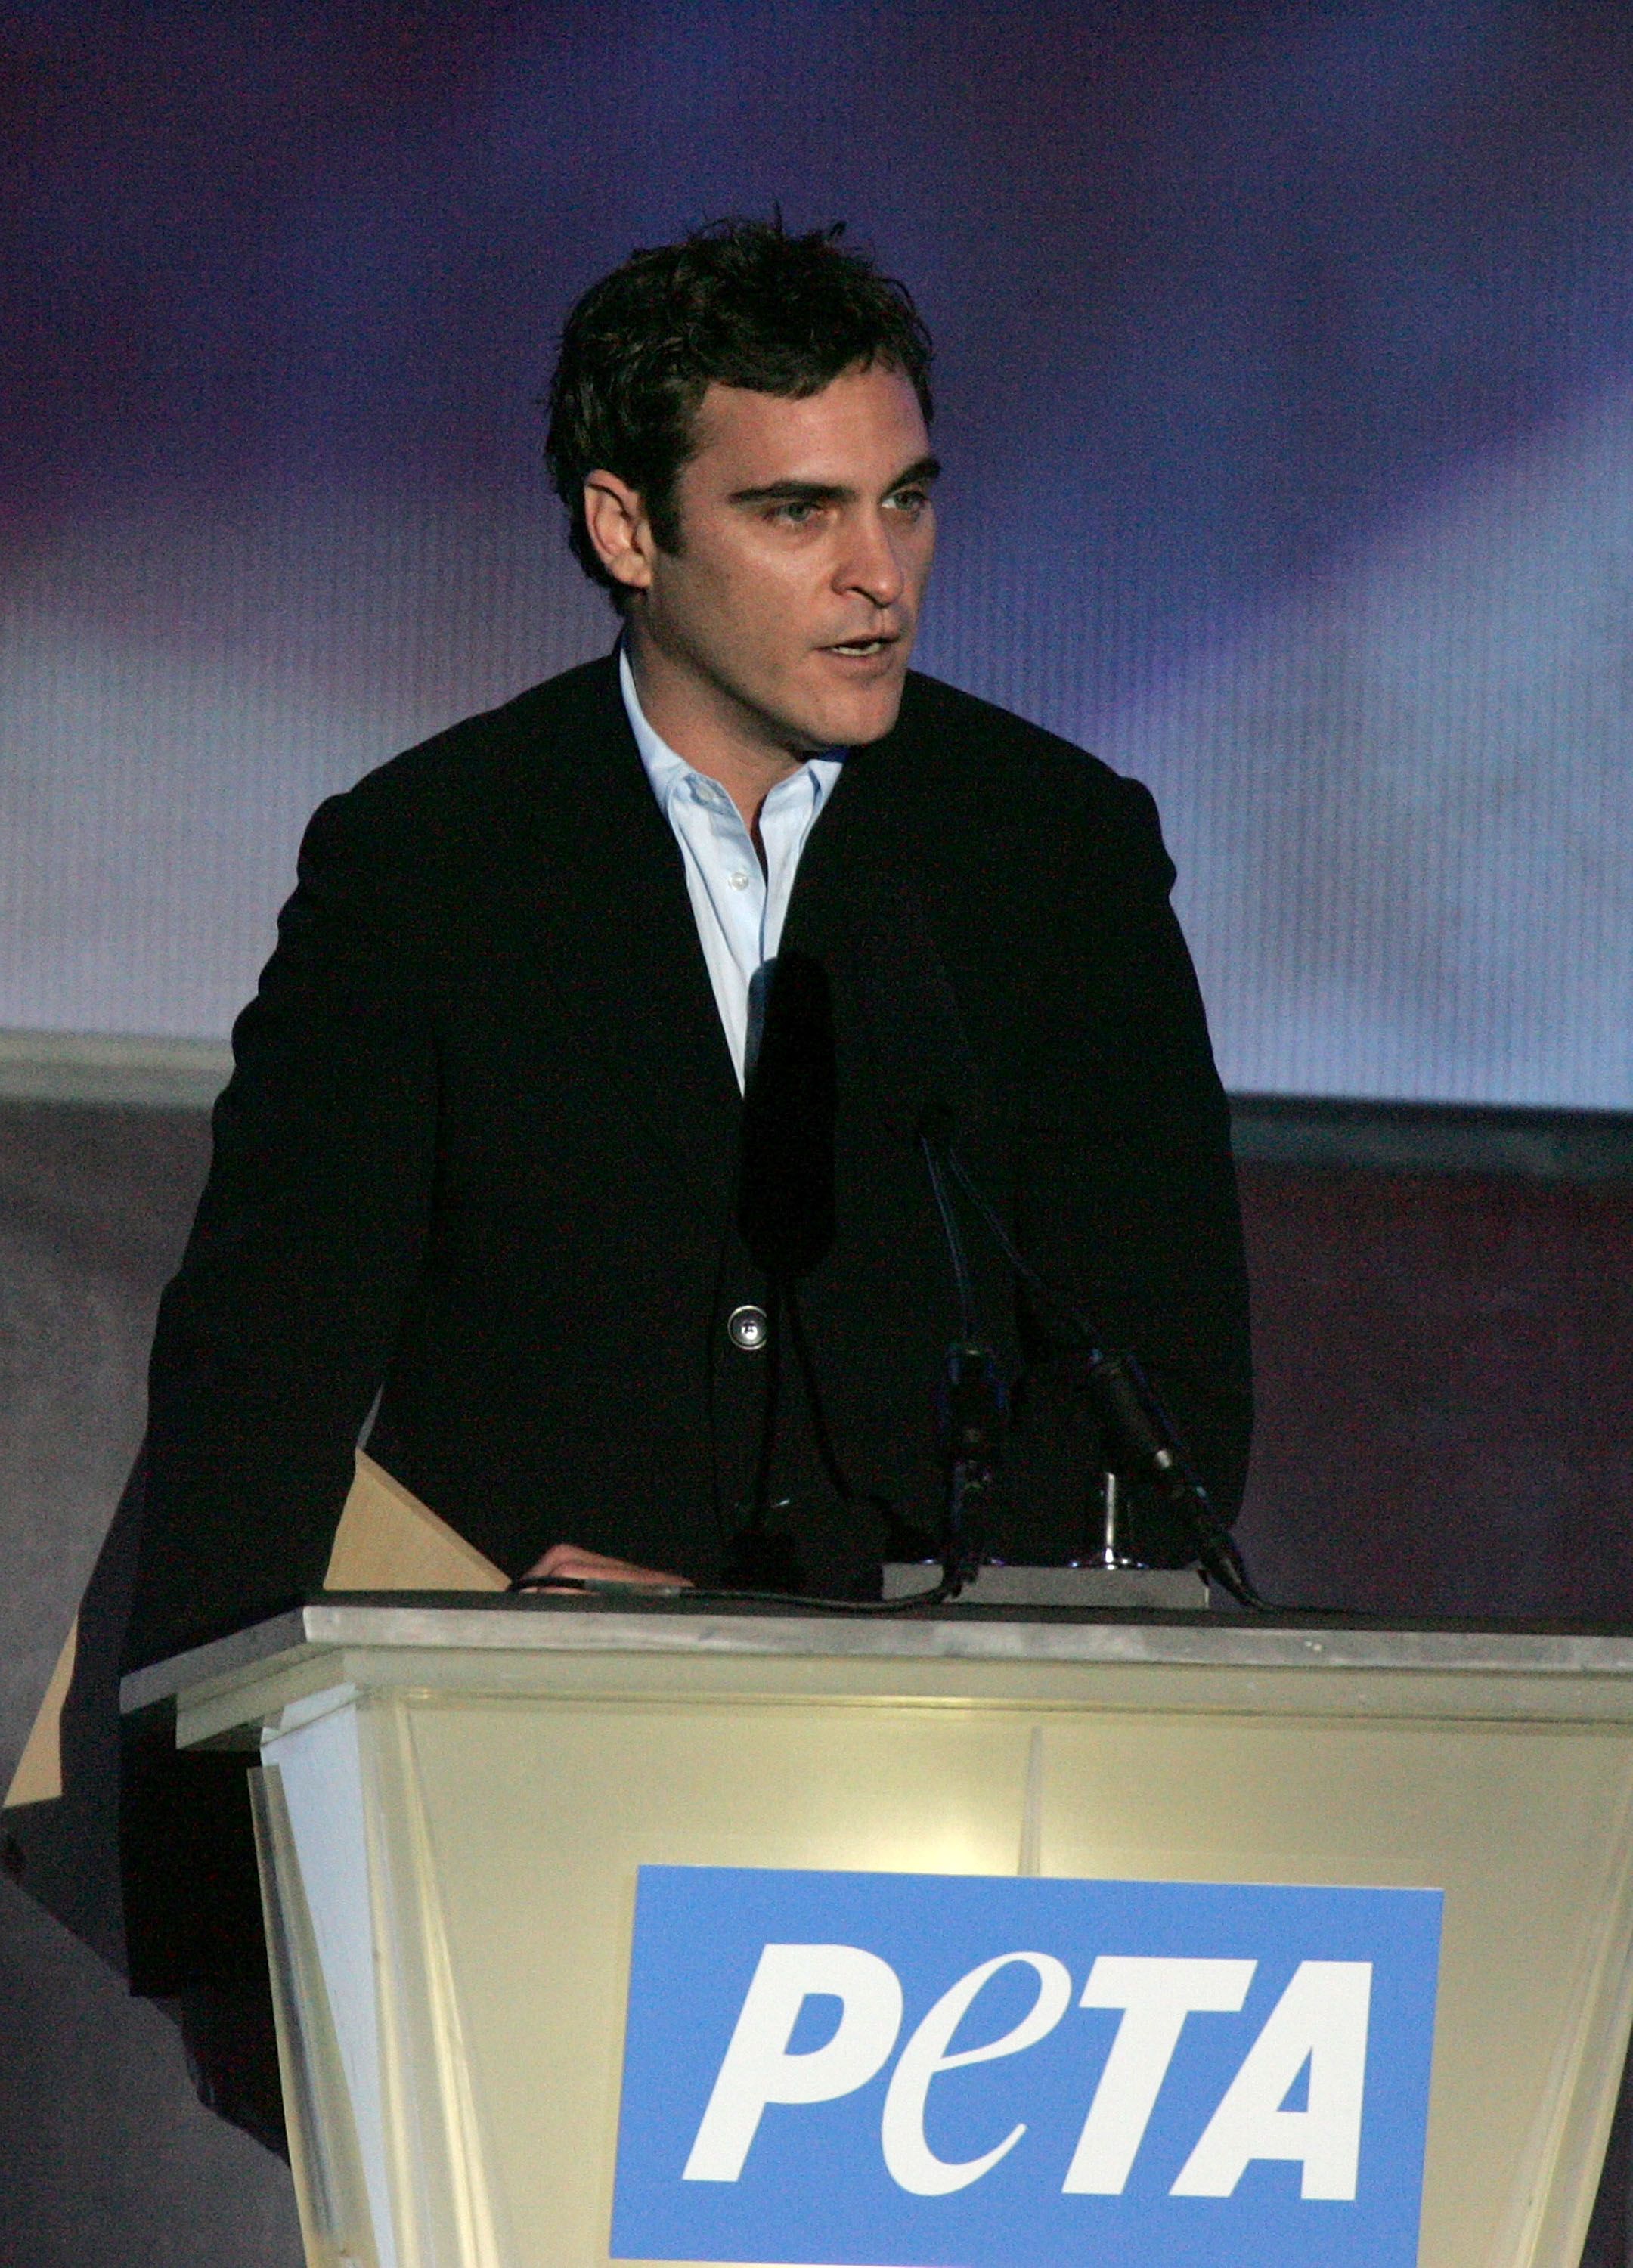 HOLLYWOOD - SEPTEMBER 10: Actor Joaquin Phoenix accepts the Humanitarian Award on behalf of Casey Affleck during PETA's 15th Anniversary Gala and Humanitarian Awards at Paramount Studios on September 10, 2005 in Hollywood, California. | Foto von: Kevin Winter/ Getty Images